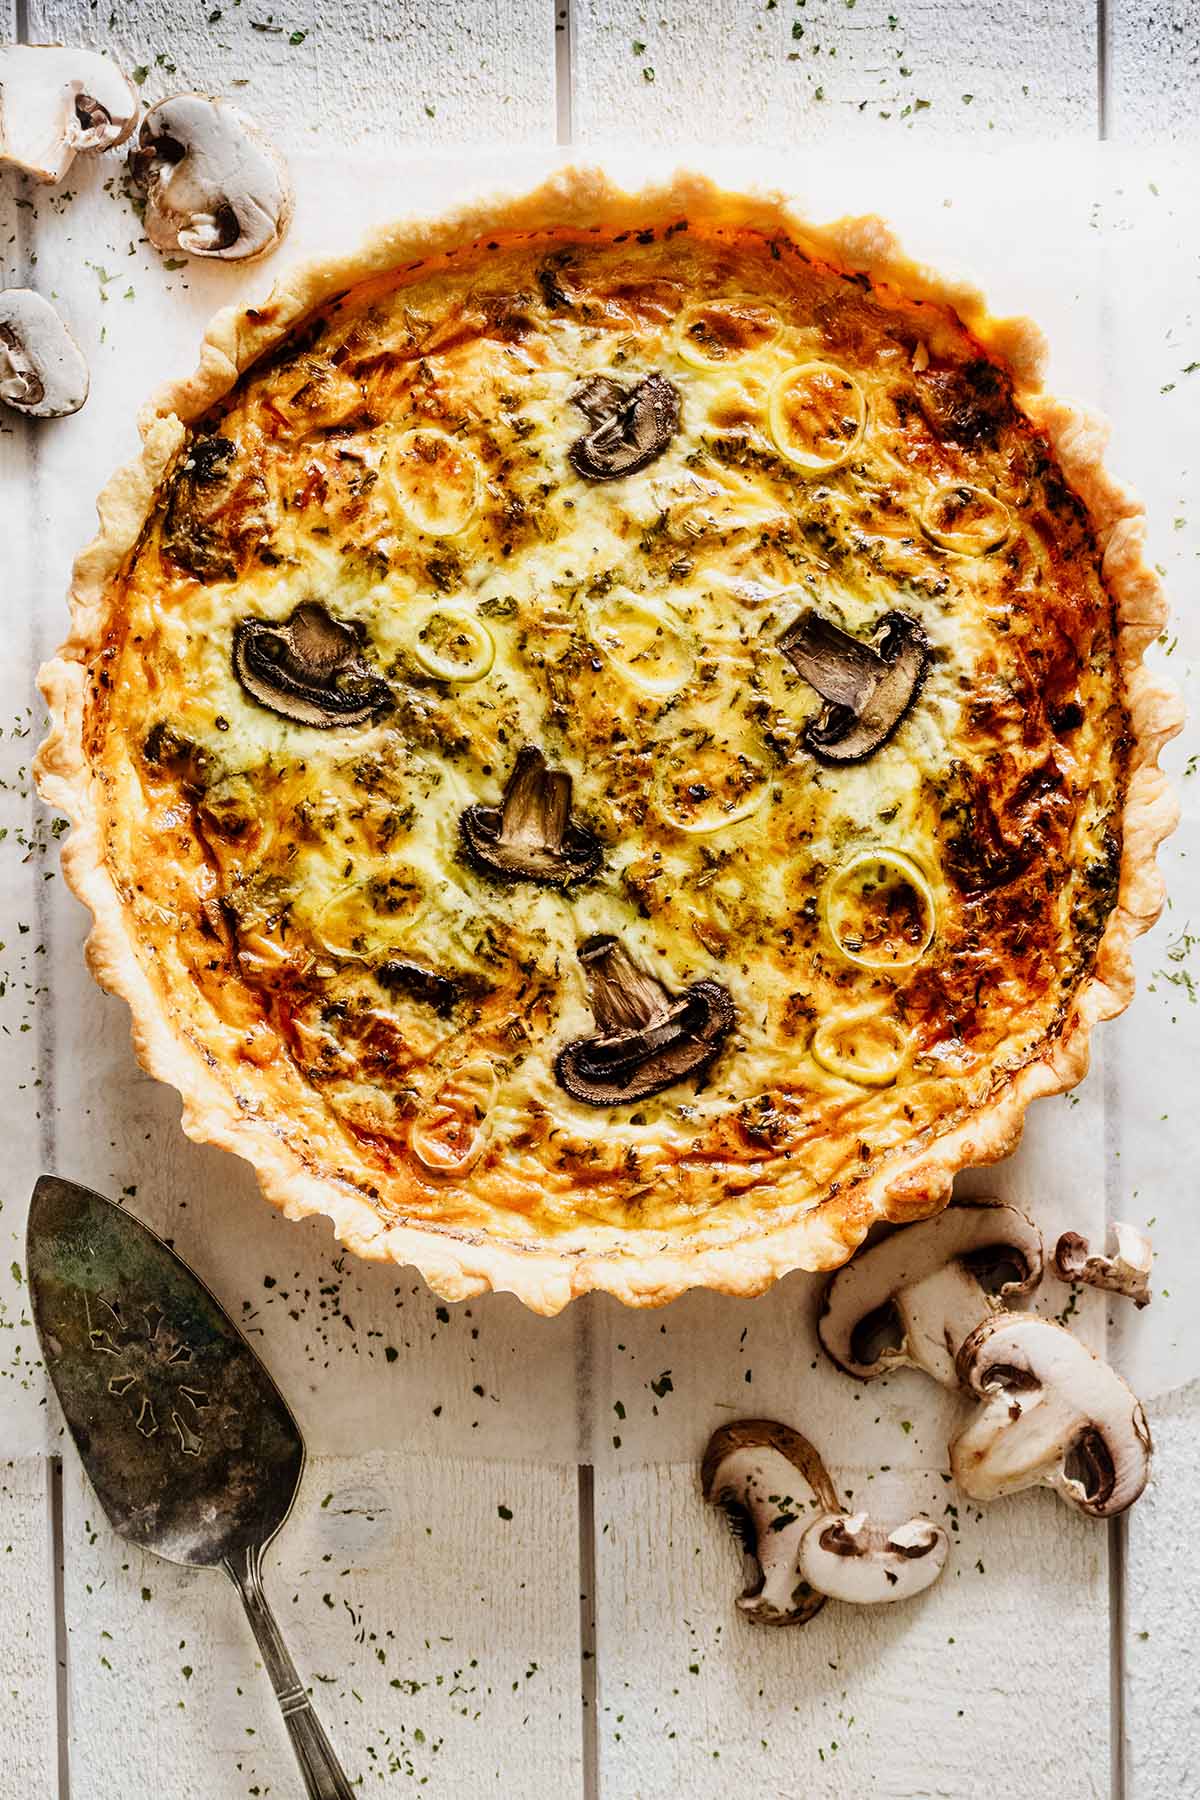 Overhead view of whole quiche on a white wood background with mushrooms and a serving spatula